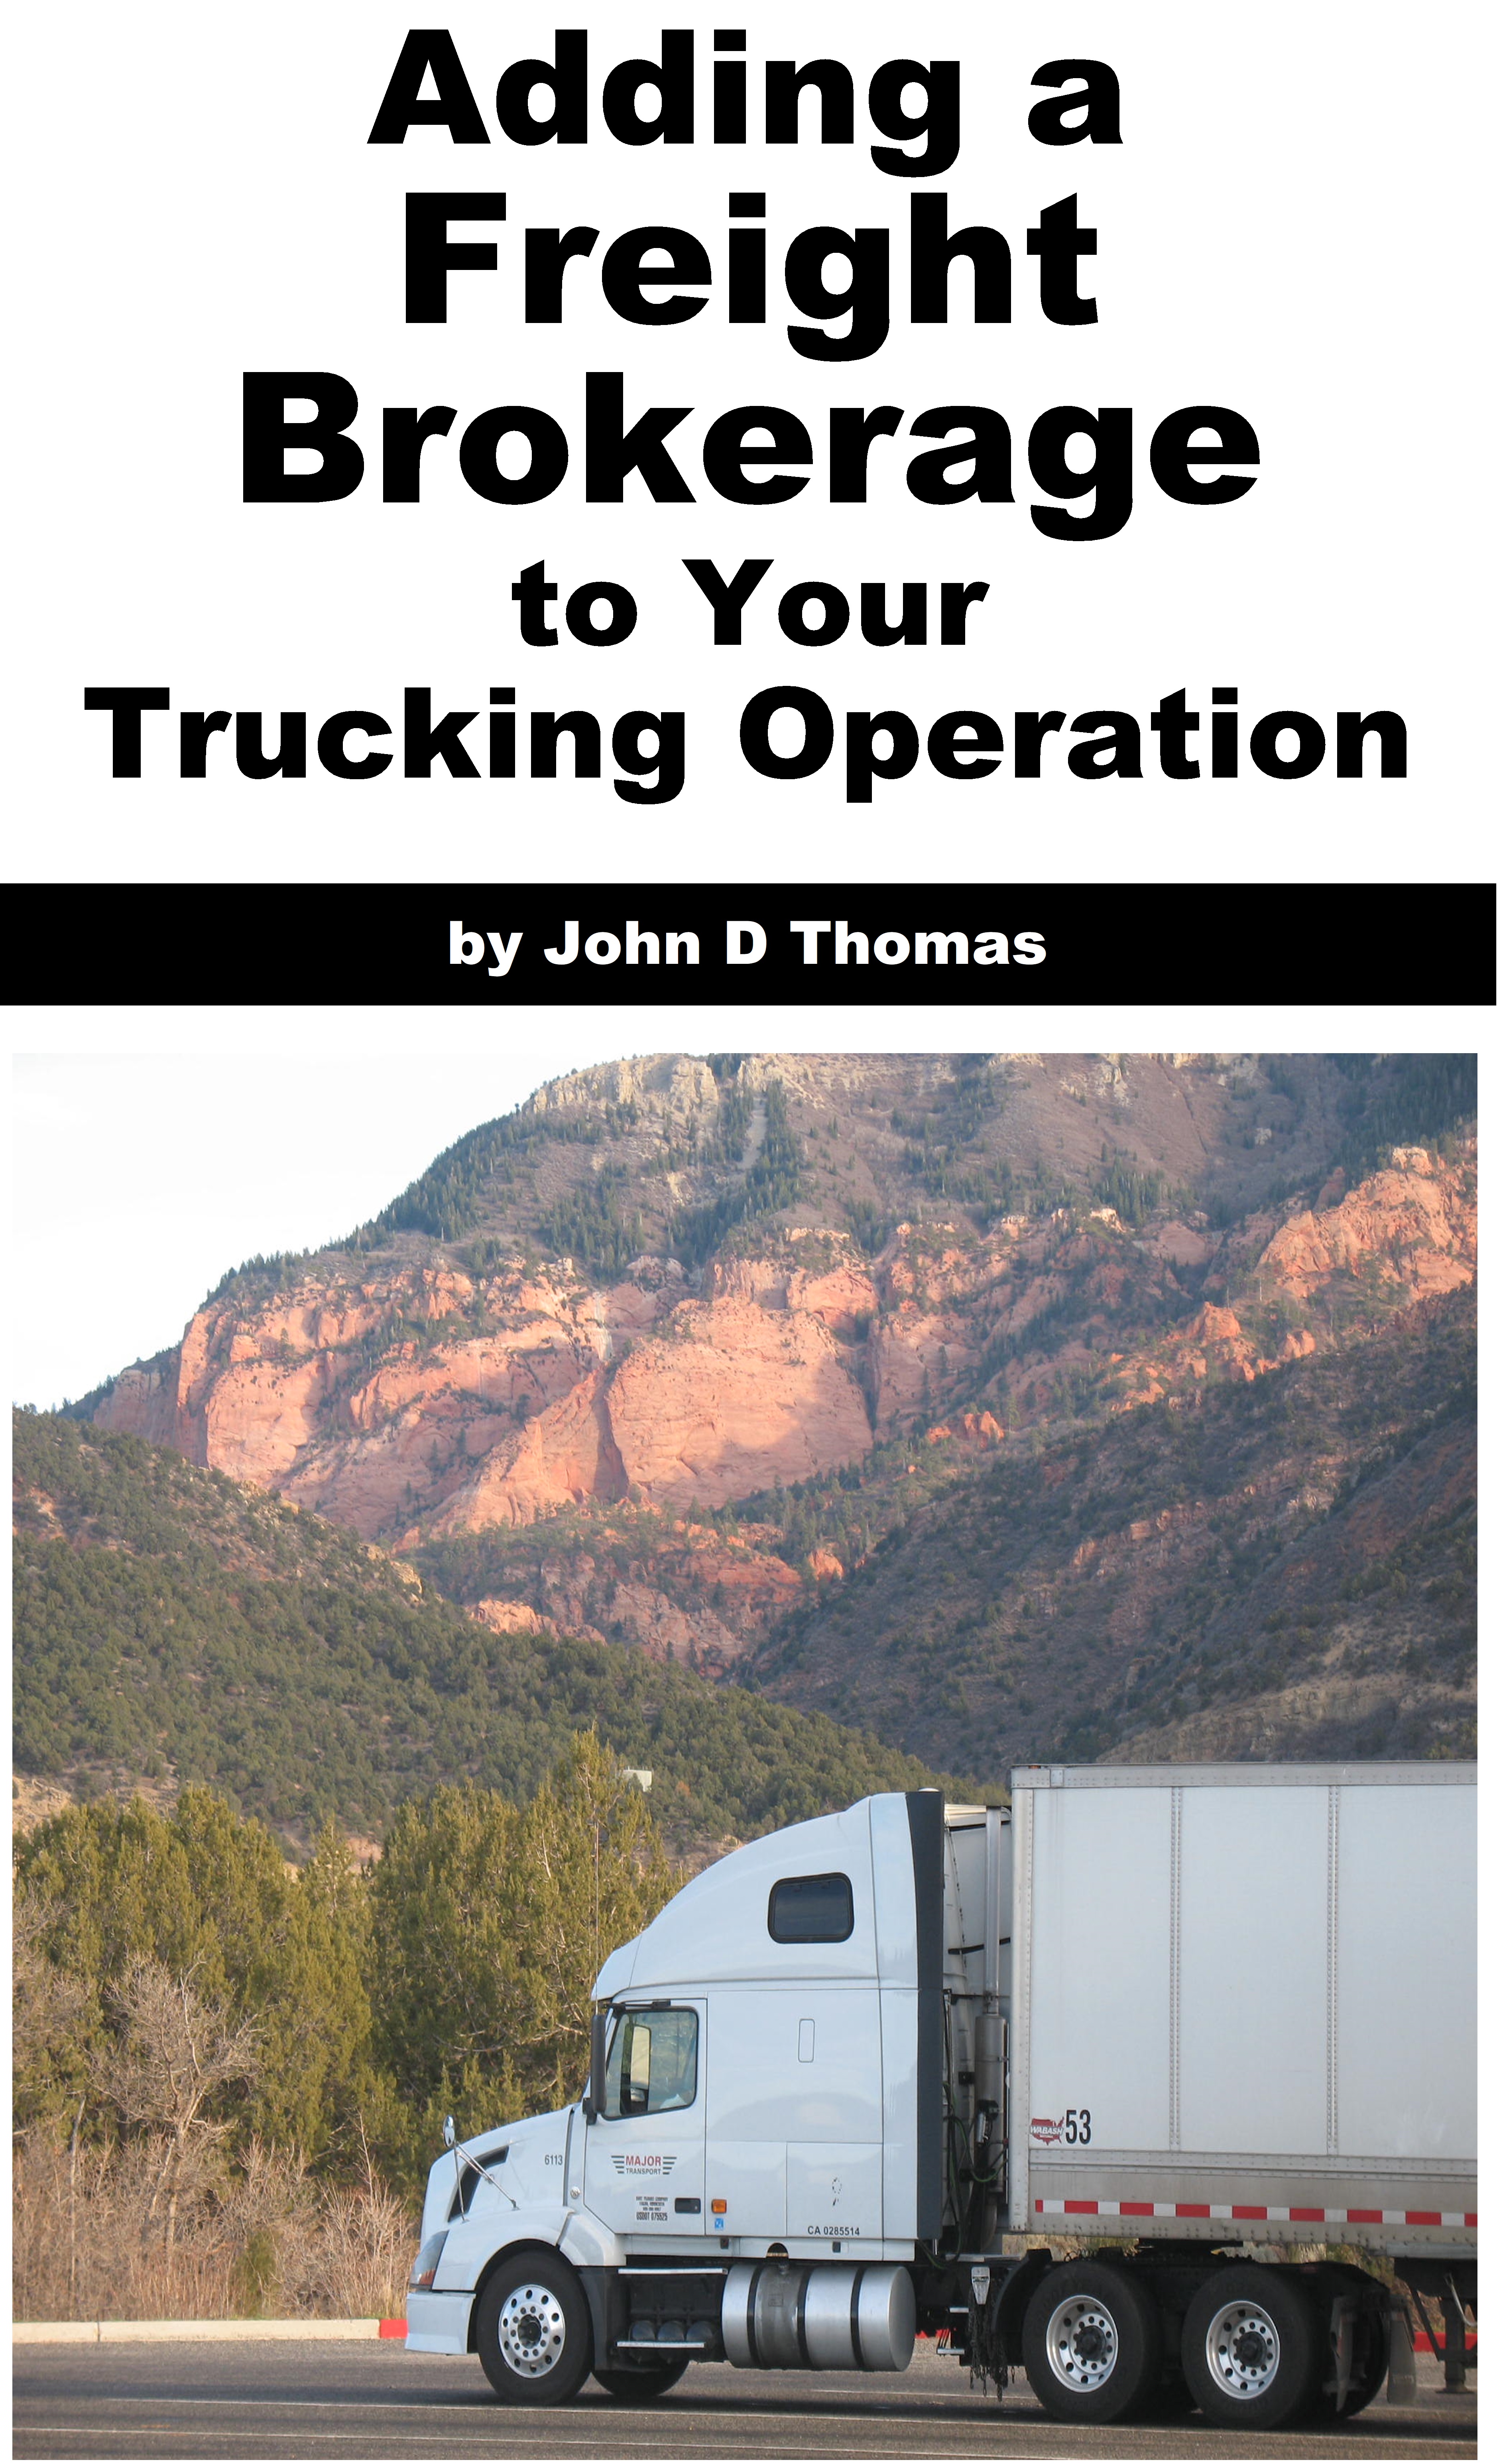 From Trucking to Brokering